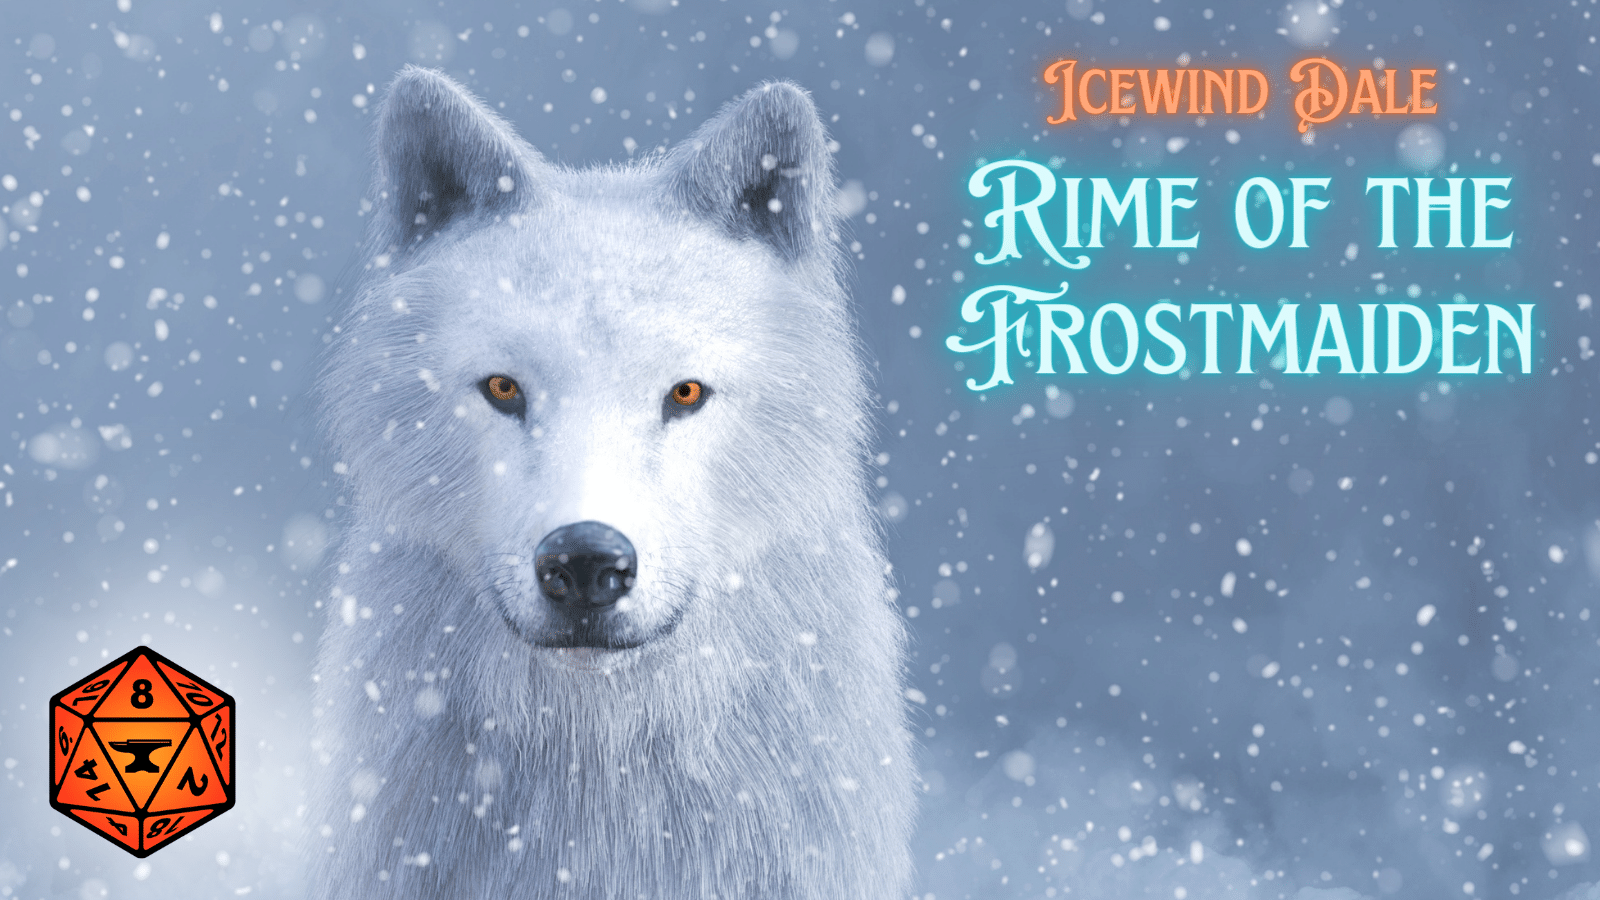 Tame the Northlands - Icewind Dale: Rime of the Frostmaiden - First Session 50% Off